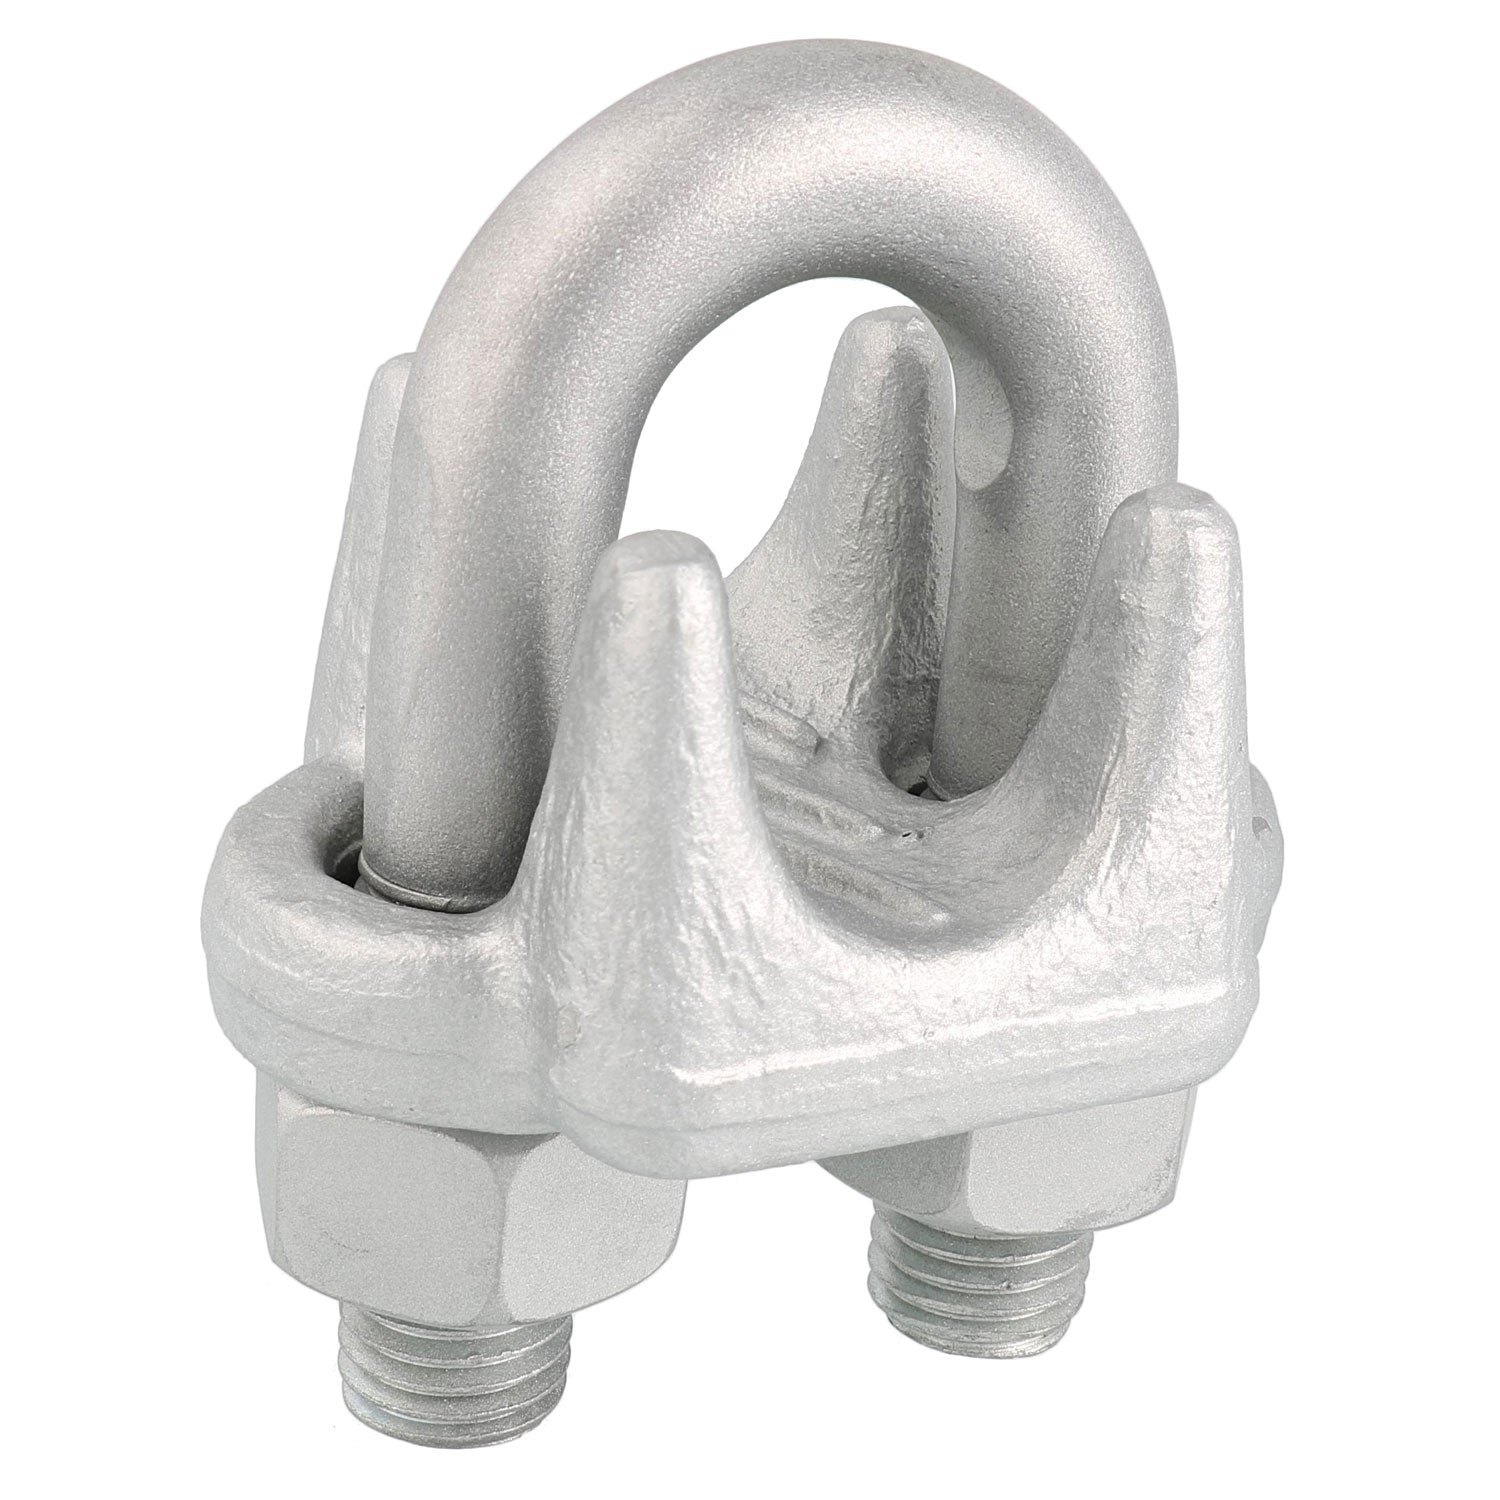 2 Pack 1-3/8 Galvanized Drop Forged Wire Rope Clips 